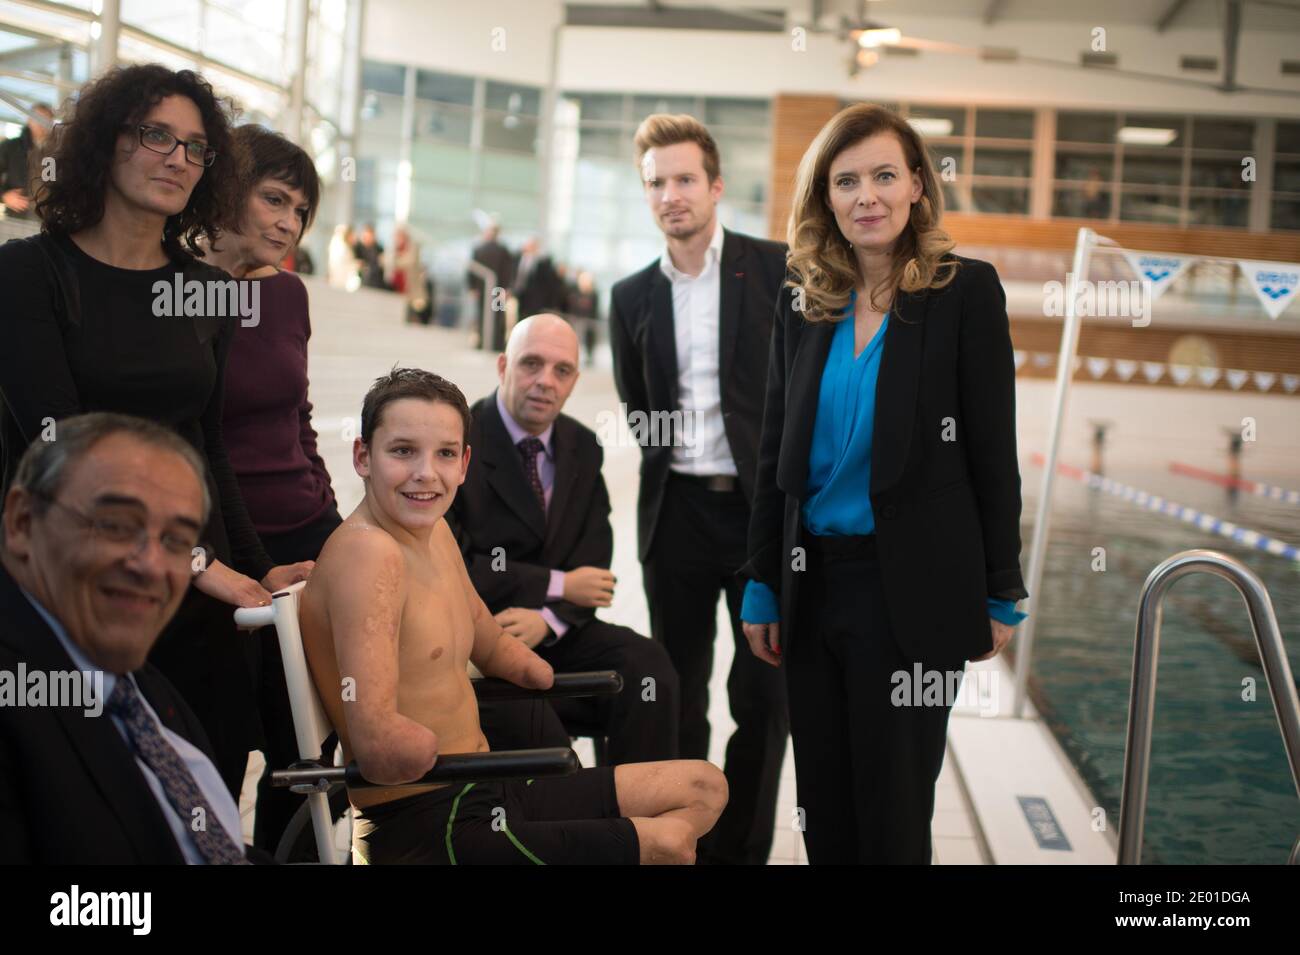 Junior Minister for Disabled People Marie-Arlette Carlotti and companion of France's President Valerie Trierweiler pose with Theo, a 13-year-old 4-limb amputee, next to his mother, four-member amputee swimmer Philippe Croizon, paralympic 100m butterfly - S8 champion Charles Rozoy and Handisports Federation President Gerard Masson on November 27, 2013 in Vichy, central France. Theo is a grant holder of the disabled sports branch of the French Expertise and Performance Ressource Centre (CREPS) of Vichy Auvergne, where he trains in swimming. In early 2013, he competed for the first time in the Fr Stock Photo